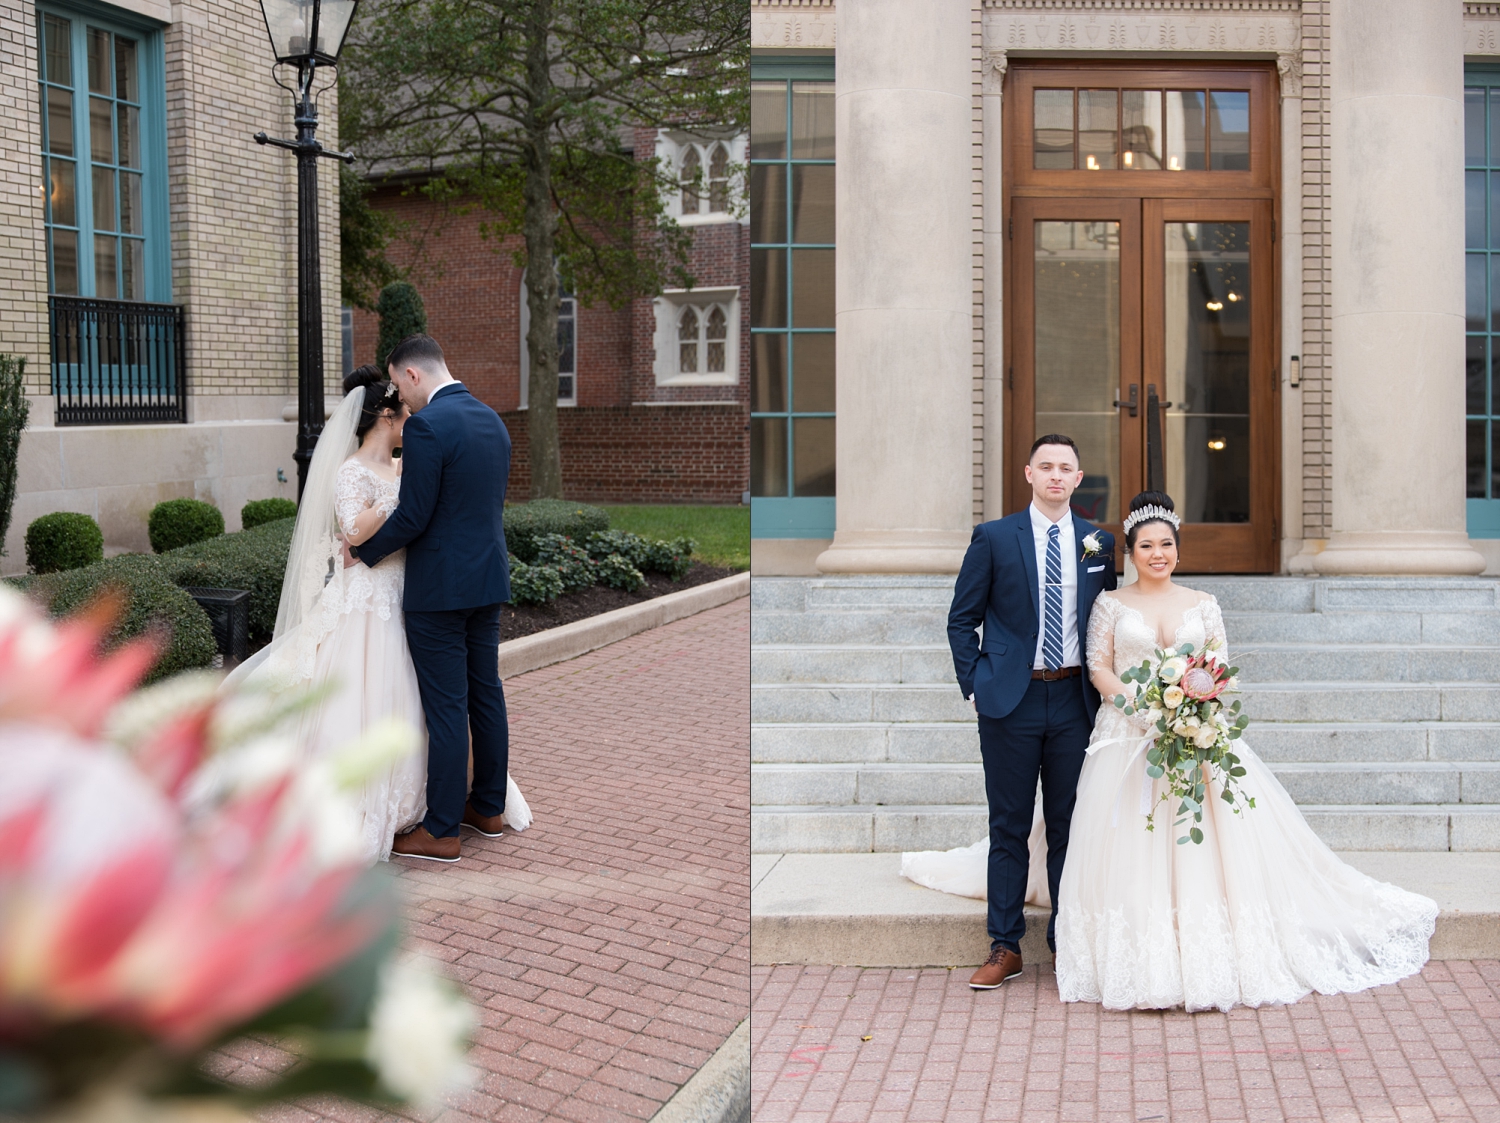 Magical Harry Potter-Themed Wedding in Richmond, VA - Hunter and